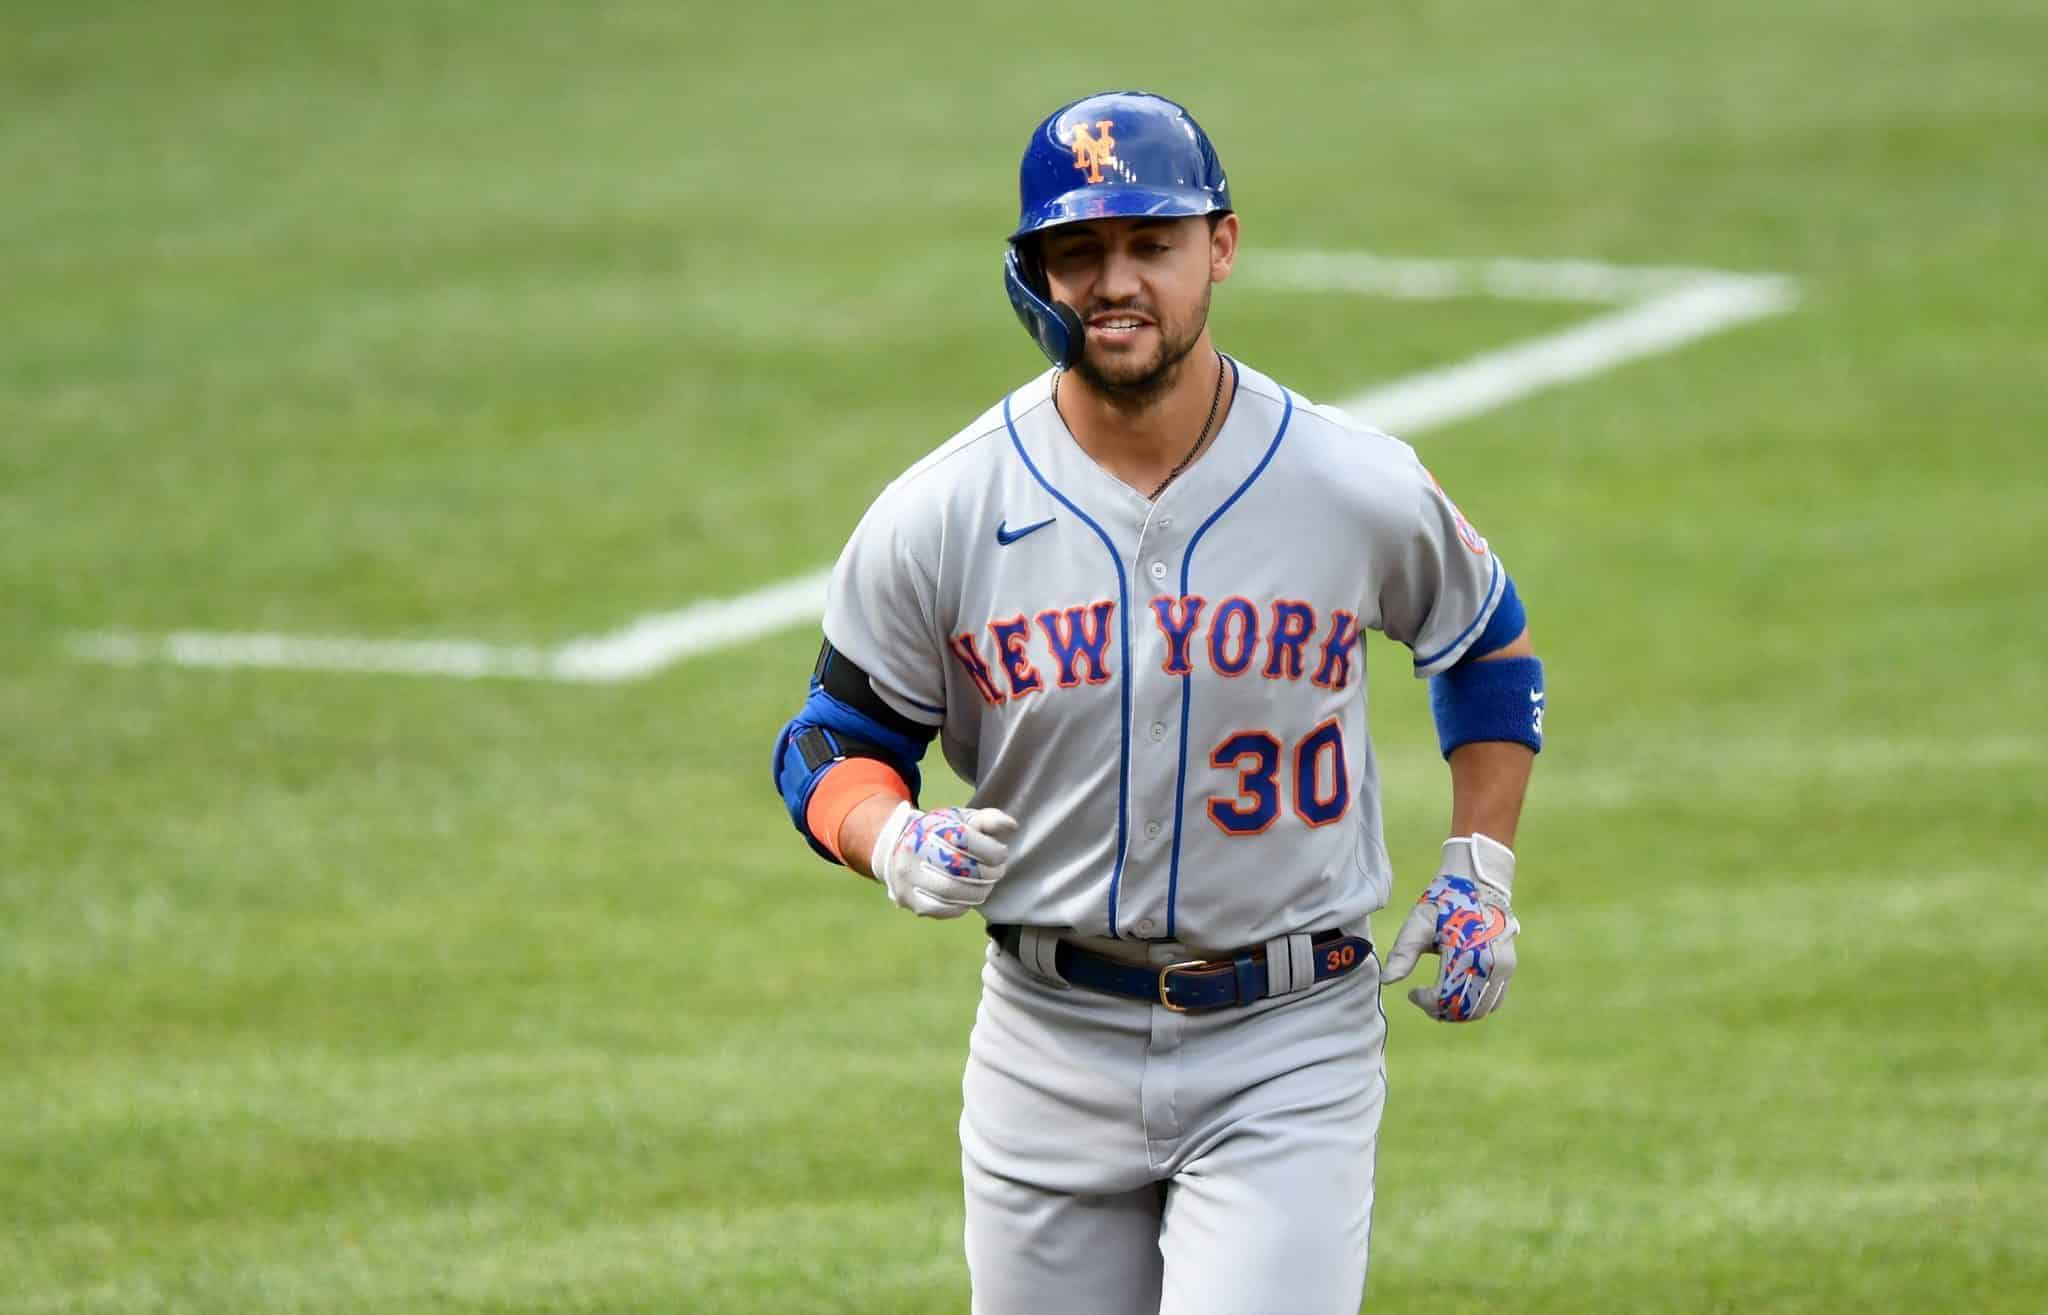 BALTIMORE, MD - SEPTEMBER 02: Michael Conforto #30 of the New York Mets rounds the bases after hitting a two-run home run in the first inning against the Baltimore Orioles at Oriole Park at Camden Yards on September 2, 2020 in Baltimore, Maryland.